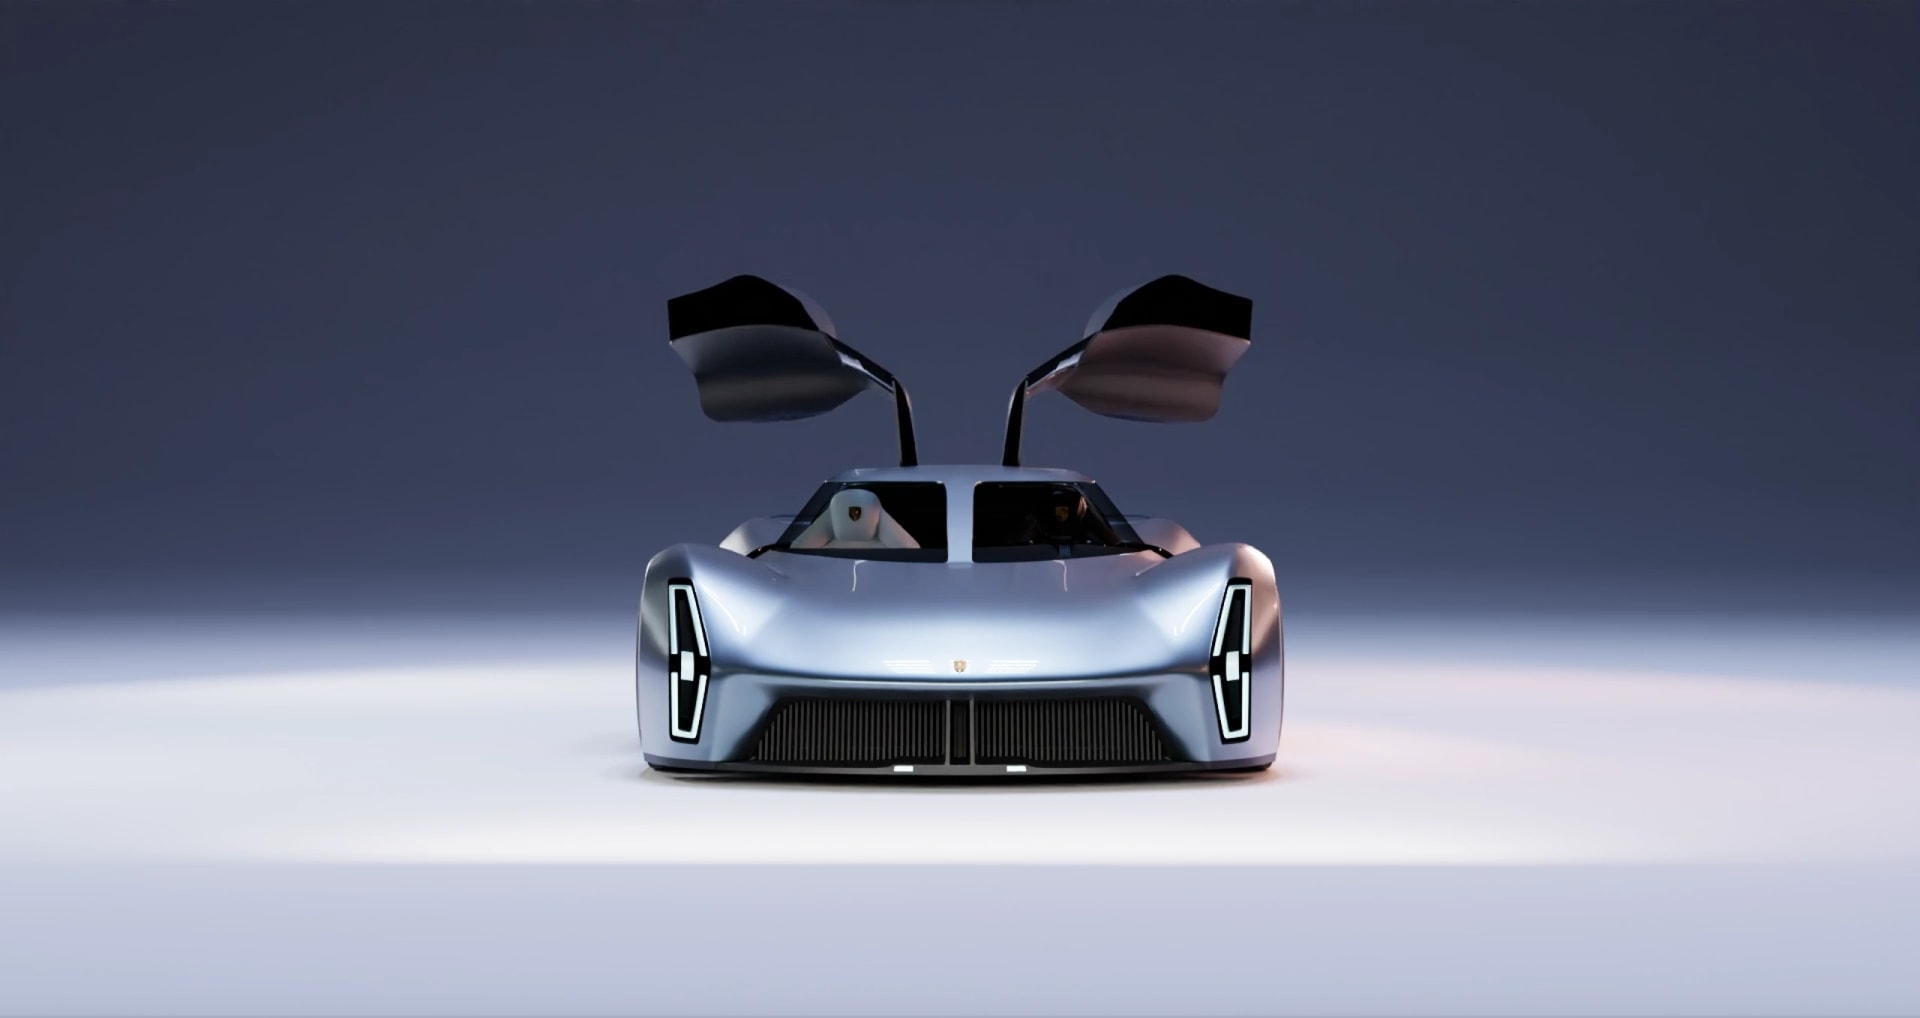 The Porsche Mission X dreams of a faster, electric sports car